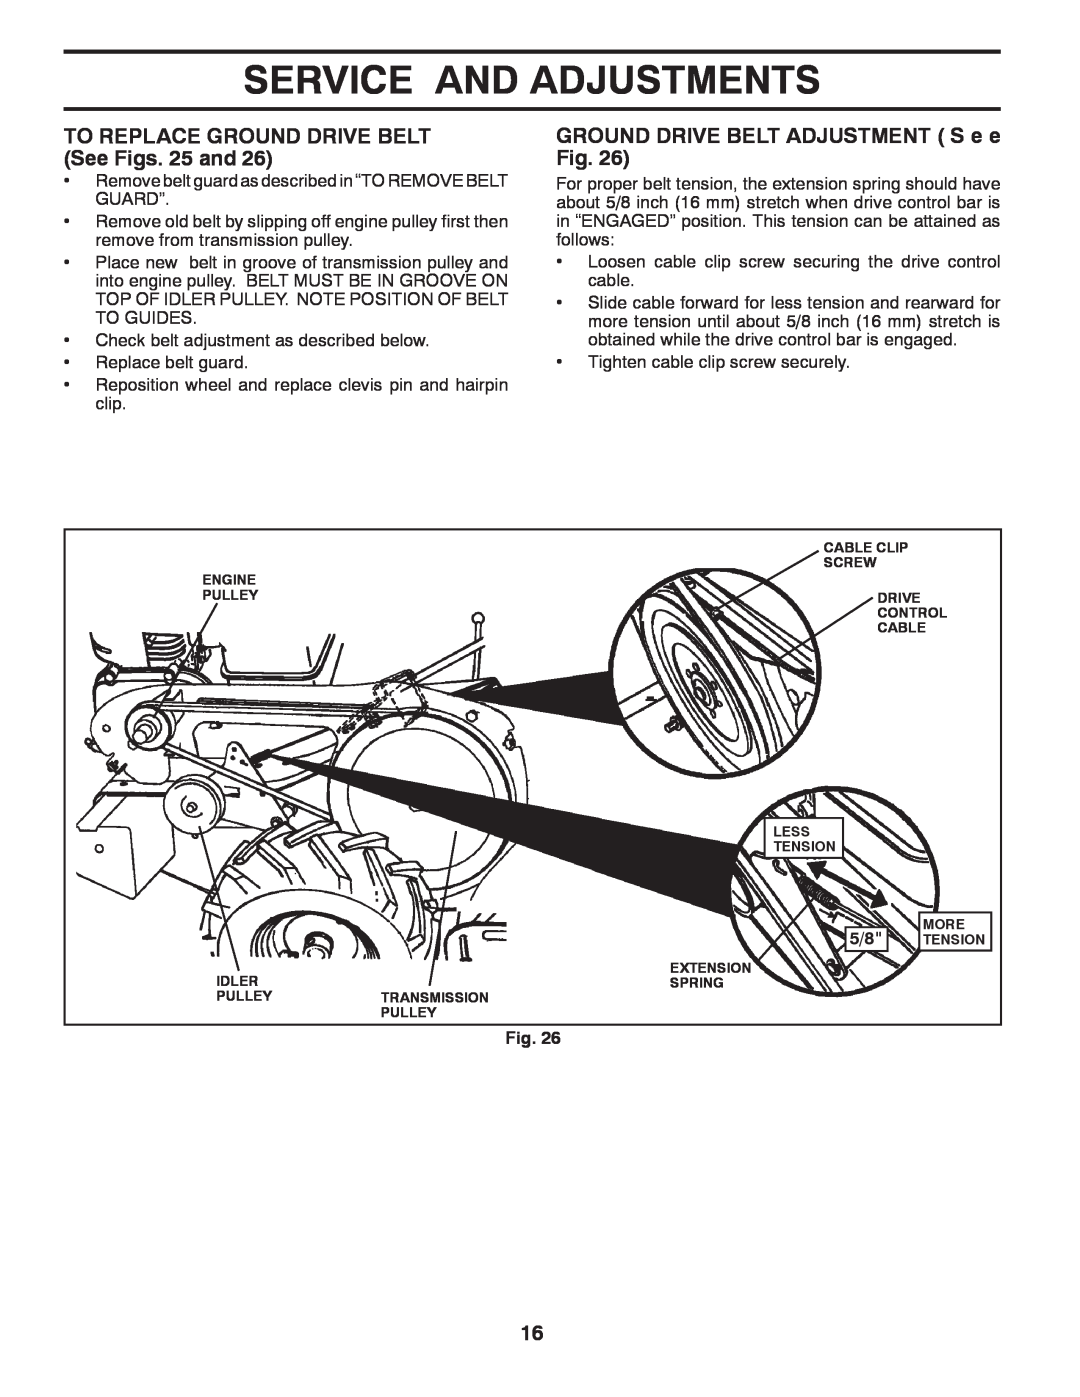 Husqvarna DRT900E owner manual TO REPLACE GROUND DRIVE BELT See Figs. 25 and, GROUND DRIVE BELT ADJUSTMENT S e e Fig 